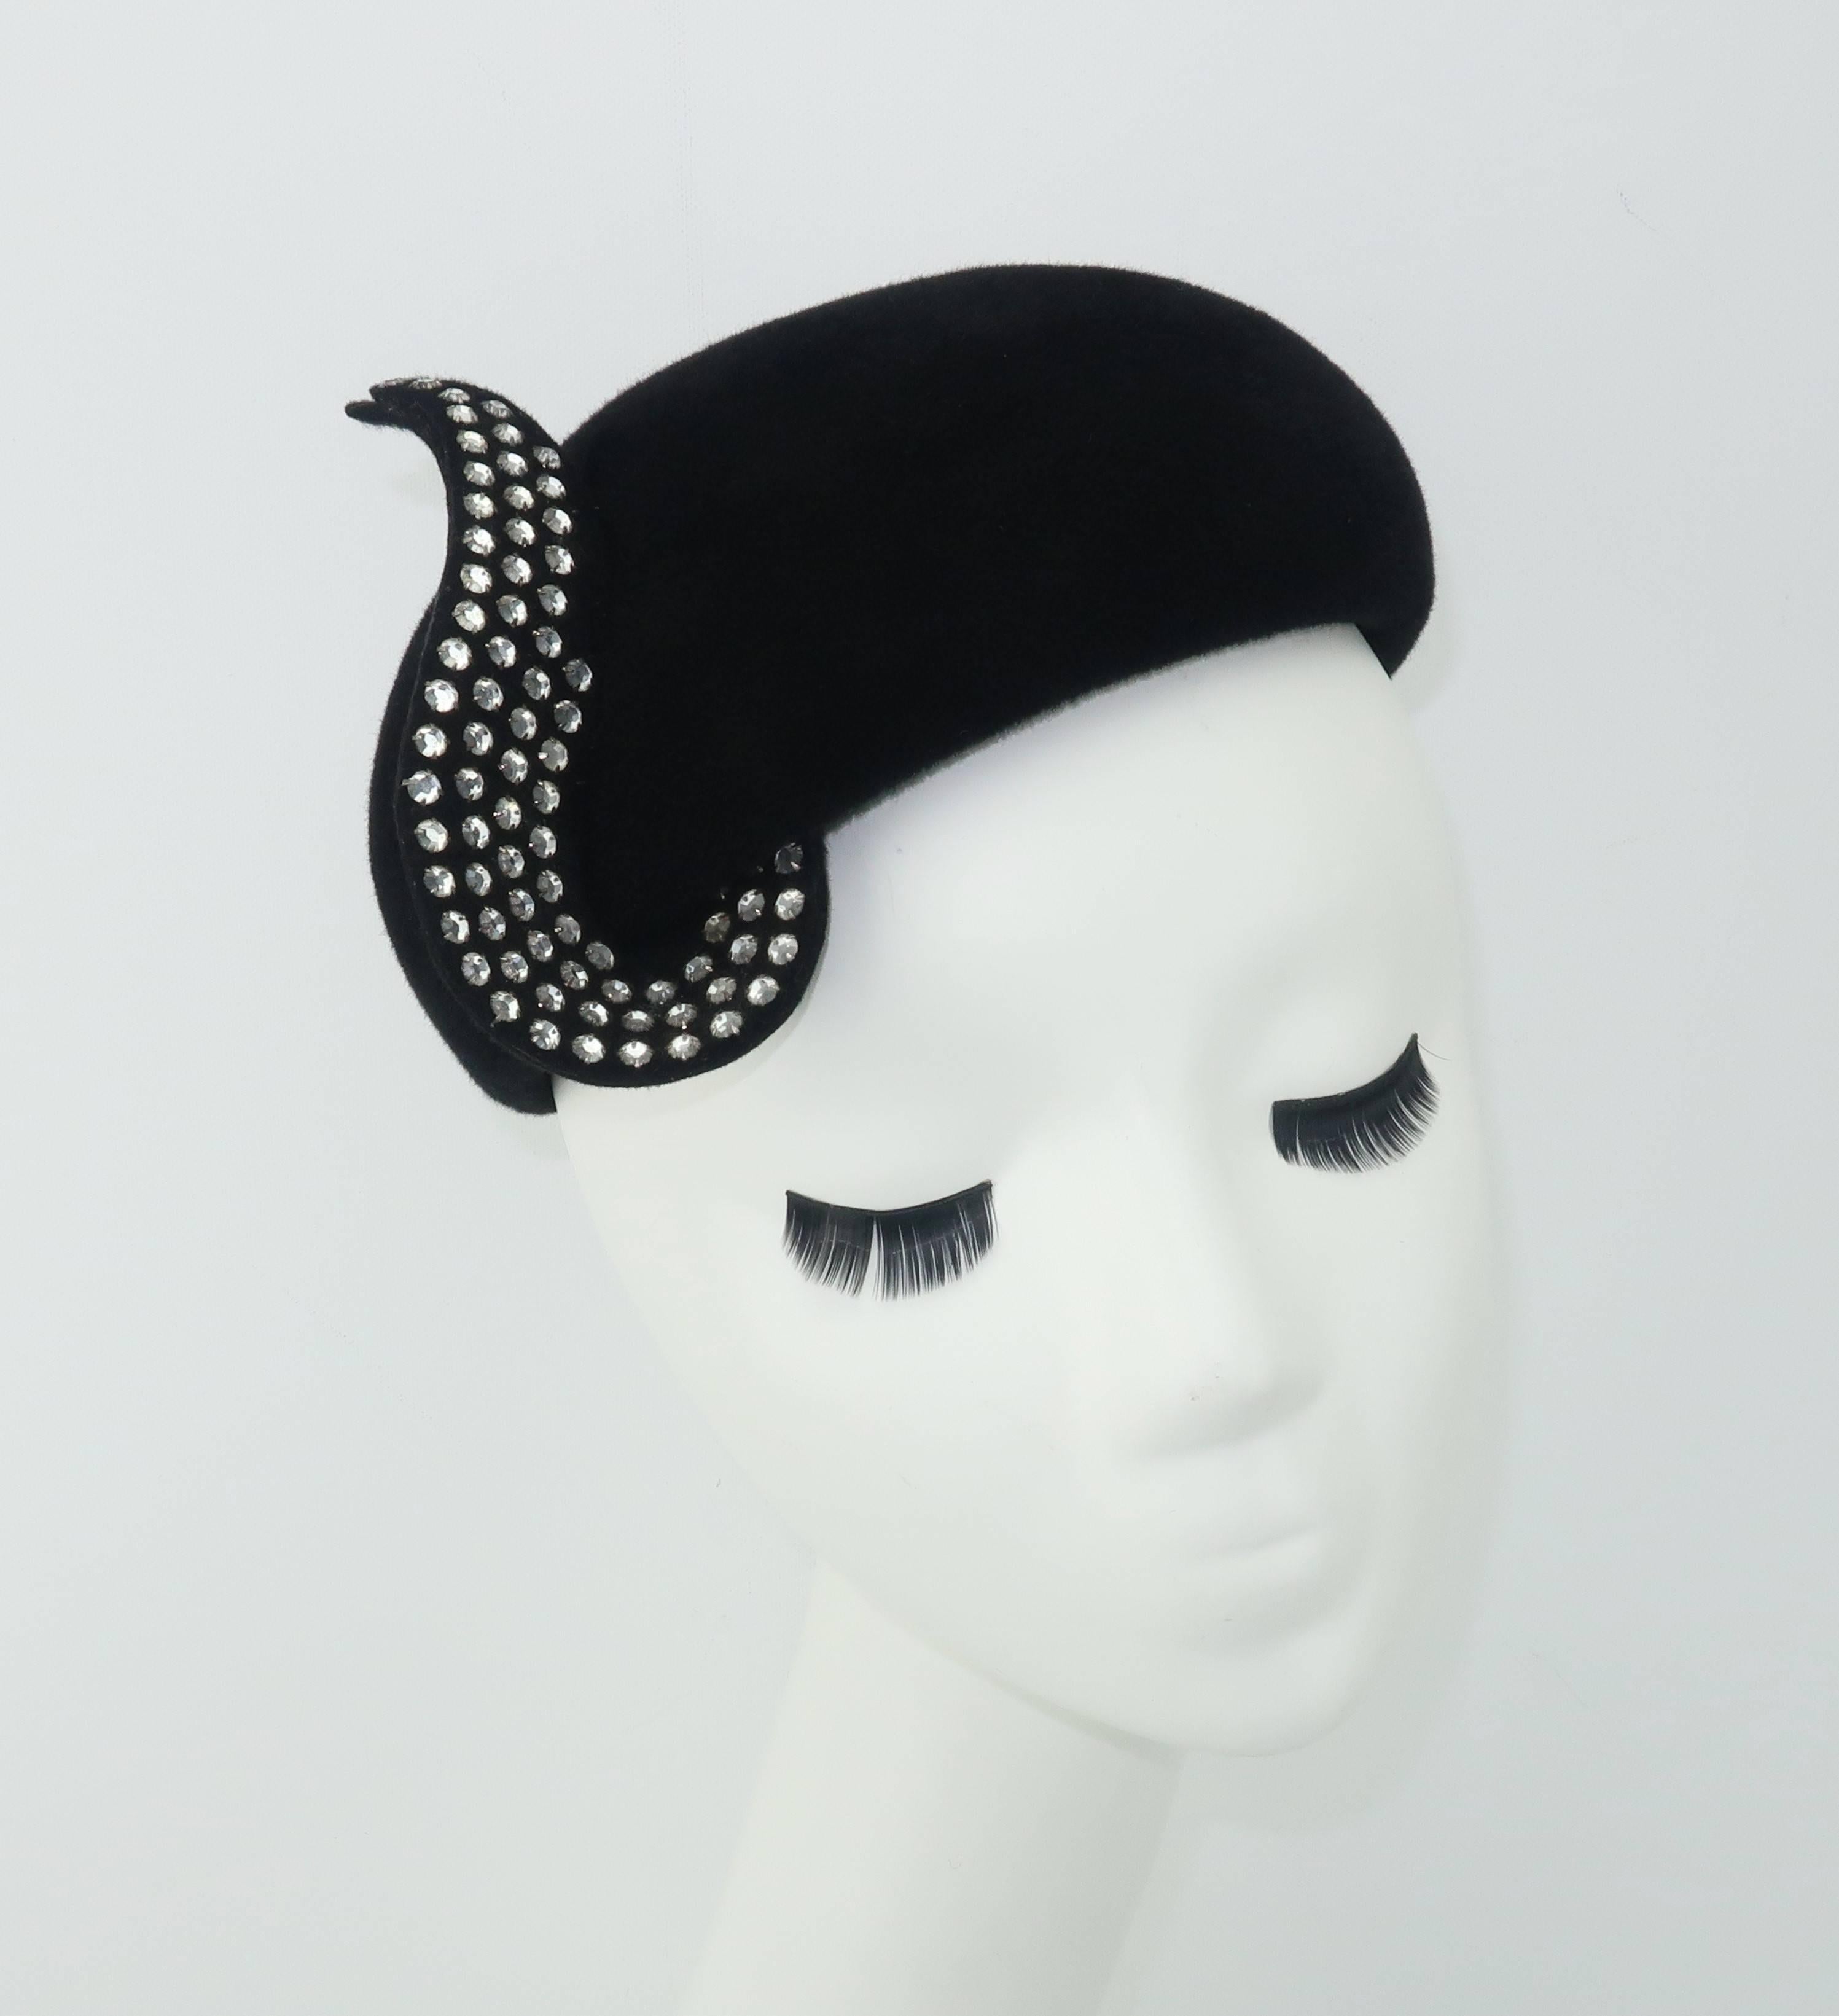 A touch of class!  This vintage Frank Olive black wool hat has a glamorous personality with a close fitting skull cap silhouette embellished by a whimsical pave crystal curlicue that catches the light with every turn.  The design recalls Mr. Olive's